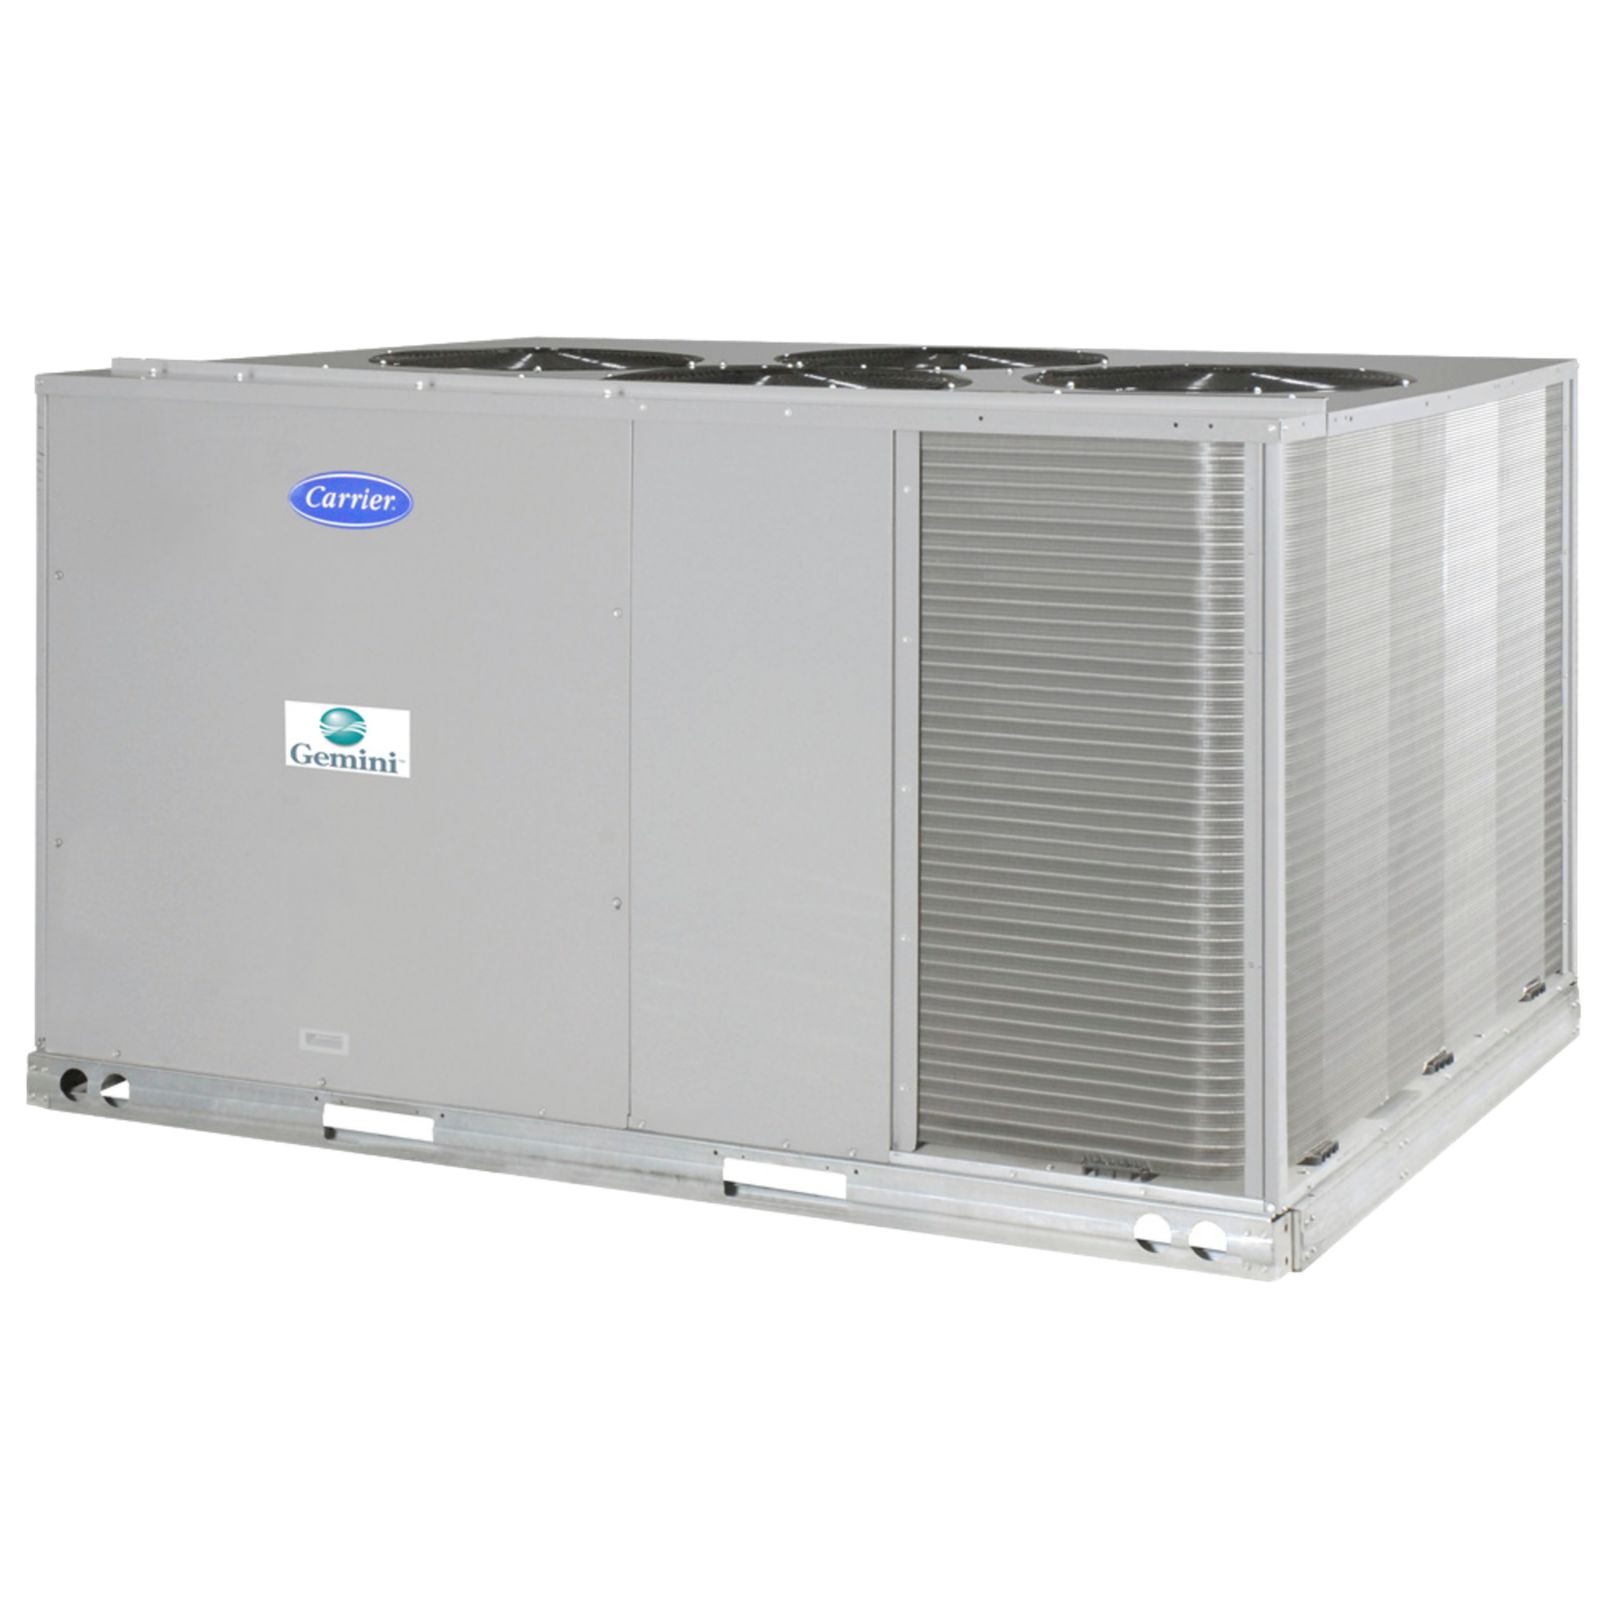 Carrier Gemini 15 Ton Commercial Air Cooled Condensing Unit